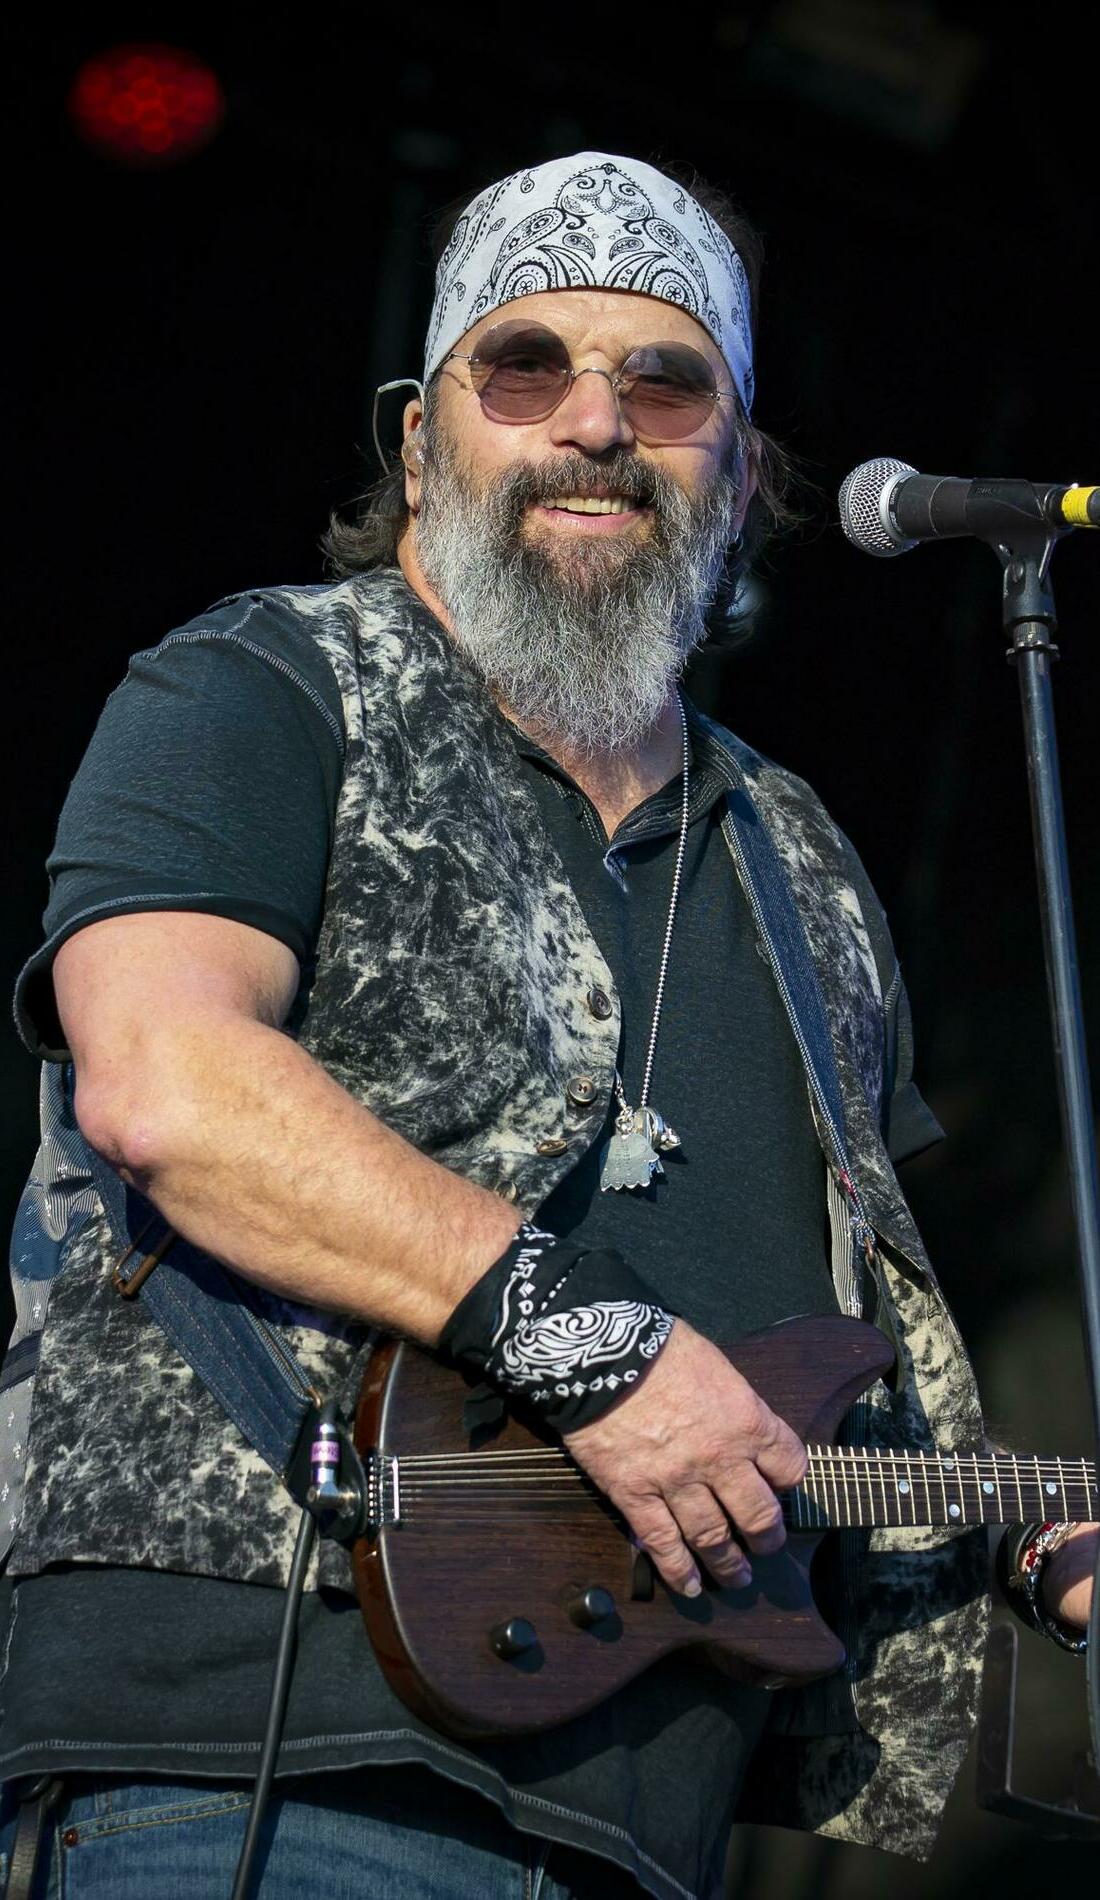 A Steve Earle live event